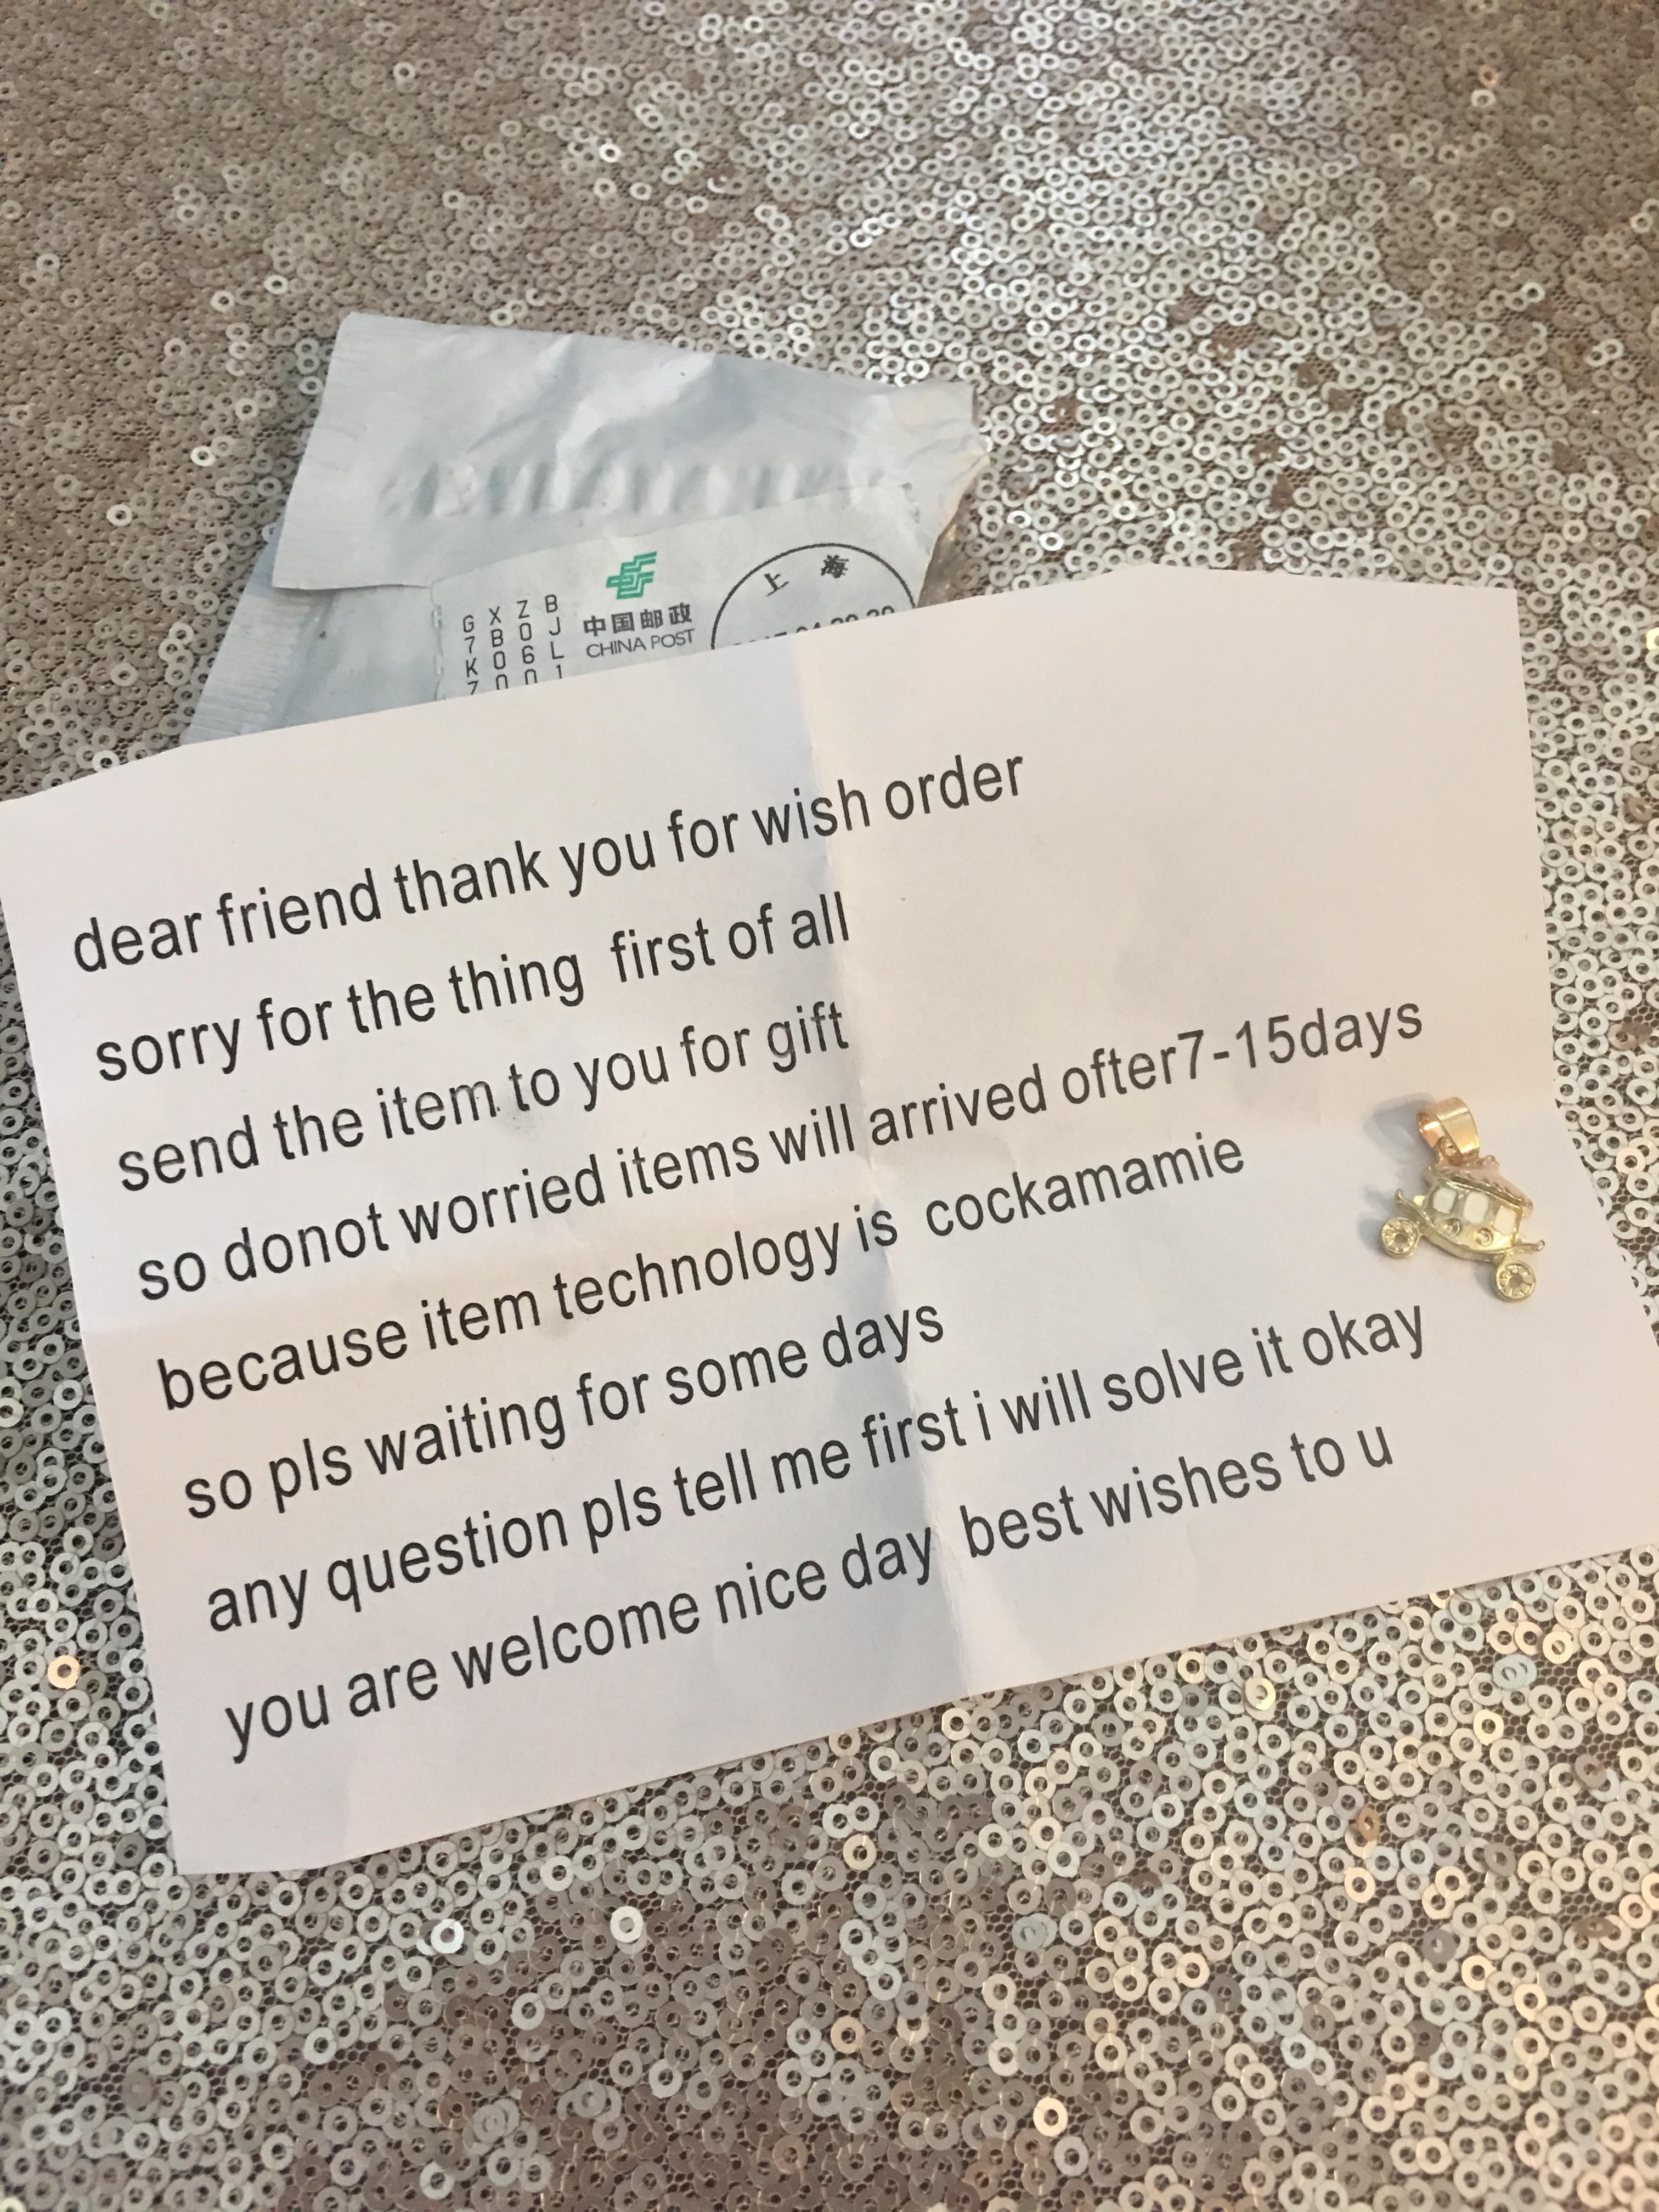 There was a mix-up with an item I ordered from China, so the seller sent me a note and a little gift to tide me over until the correct item arrived. 10/10 apology.